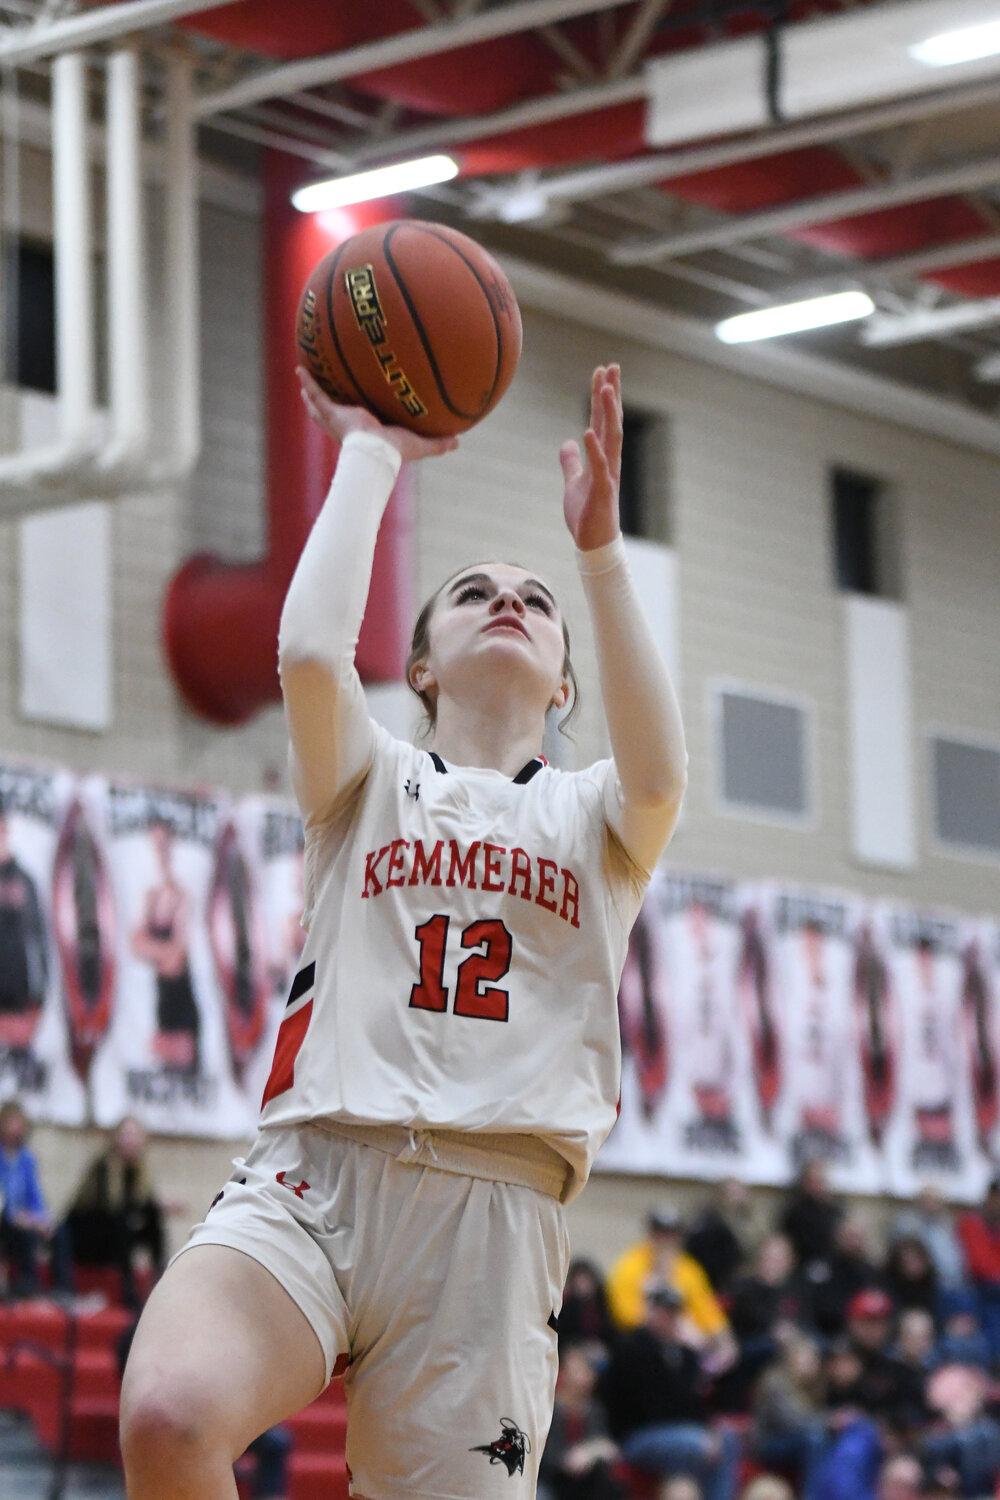 Lady Ranger junior Ella Thatcher was a 2A Southwest All-Conference selection for the first time this season averaging 5.3 points and 5.5 rebounds per game. Thatcher also led the team in total assists (32) and steals (86).